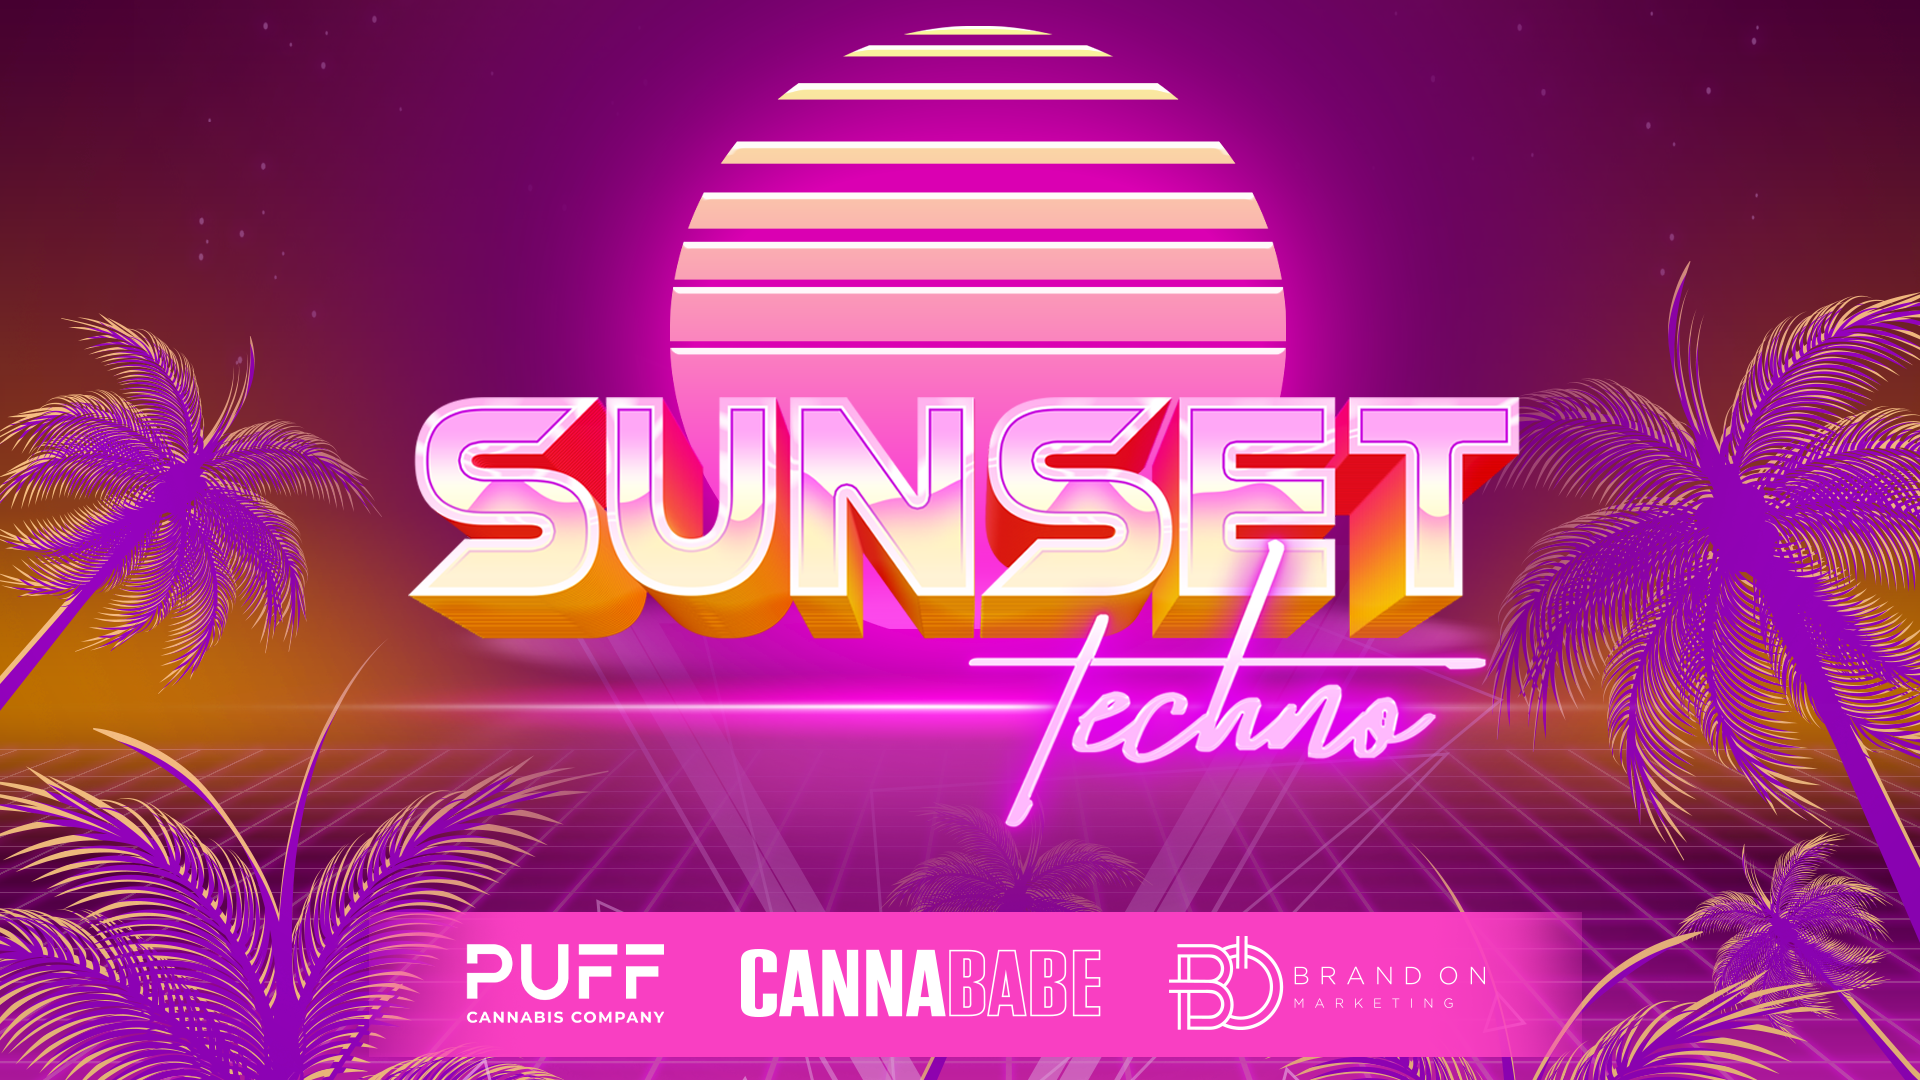 CannaBabe, a Pioneering Force in the Cannabis Industry, Hosted a Remarkable Event to Kick Off Detroit’s Memorial Weekend with Sunset Techno